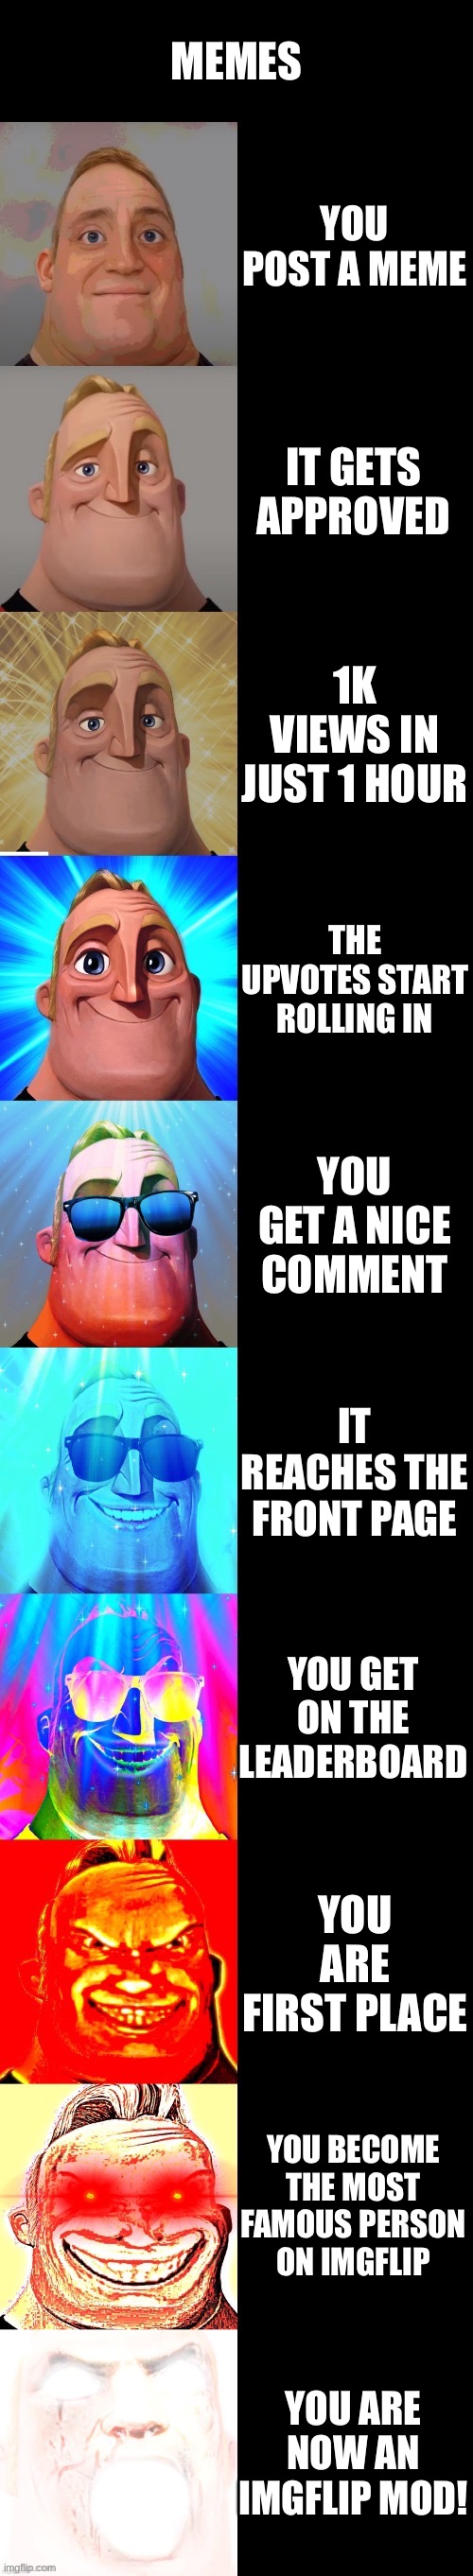 mr incredible becoming canny | MEMES; YOU POST A MEME; IT GETS APPROVED; 1K VIEWS IN JUST 1 HOUR; THE UPVOTES START ROLLING IN; YOU GET A NICE COMMENT; IT REACHES THE FRONT PAGE; YOU GET ON THE LEADERBOARD; YOU ARE FIRST PLACE; YOU BECOME THE MOST FAMOUS PERSON ON IMGFLIP; YOU ARE NOW AN IMGFLIP MOD! | image tagged in mr incredible becoming canny | made w/ Imgflip meme maker